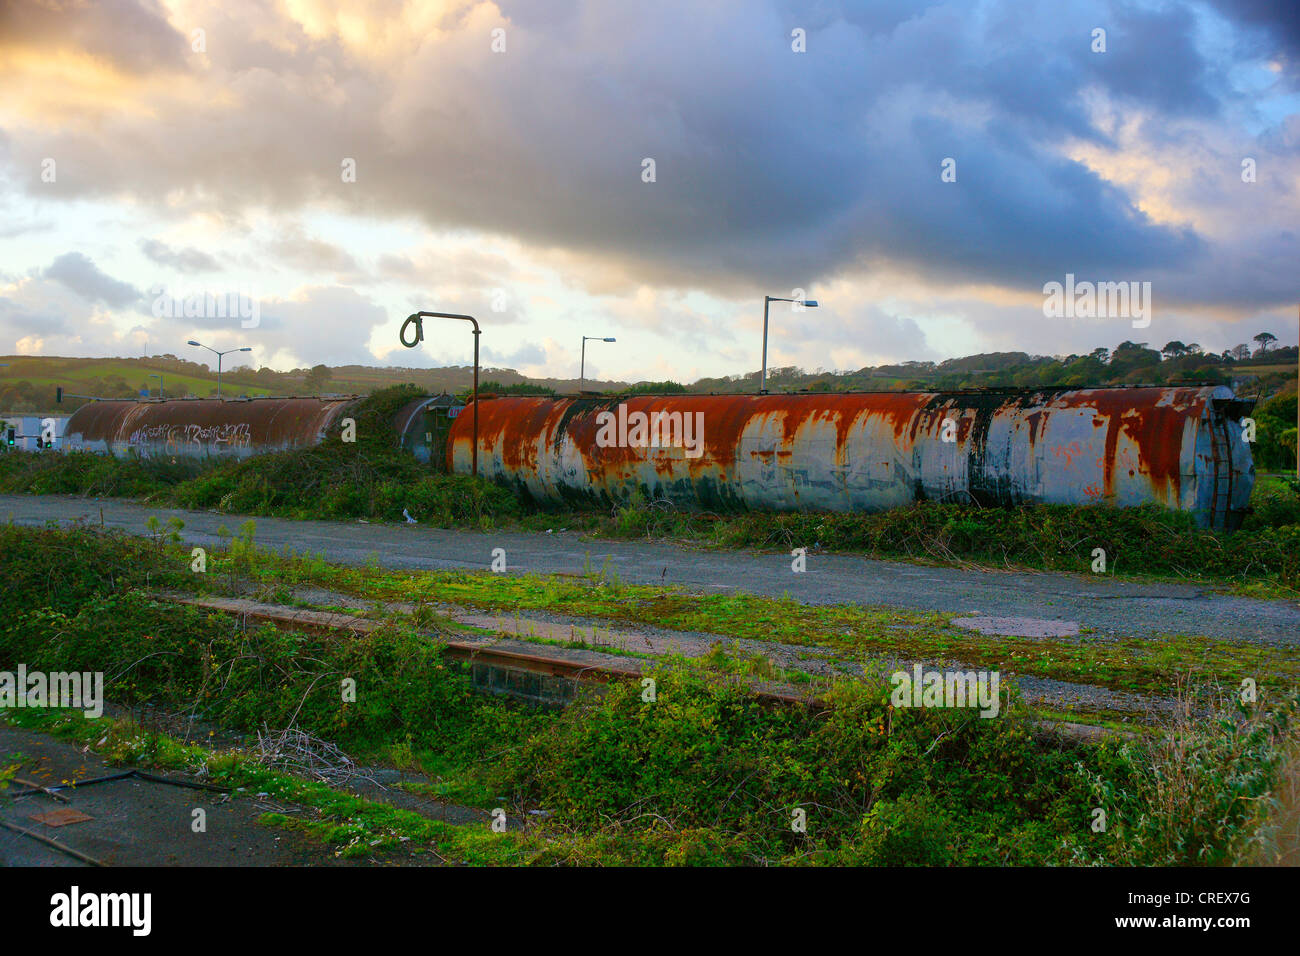 The old goods sidings at Penzance, now quiet and derelict, they at atmospheric, almost spooky! Stock Photo